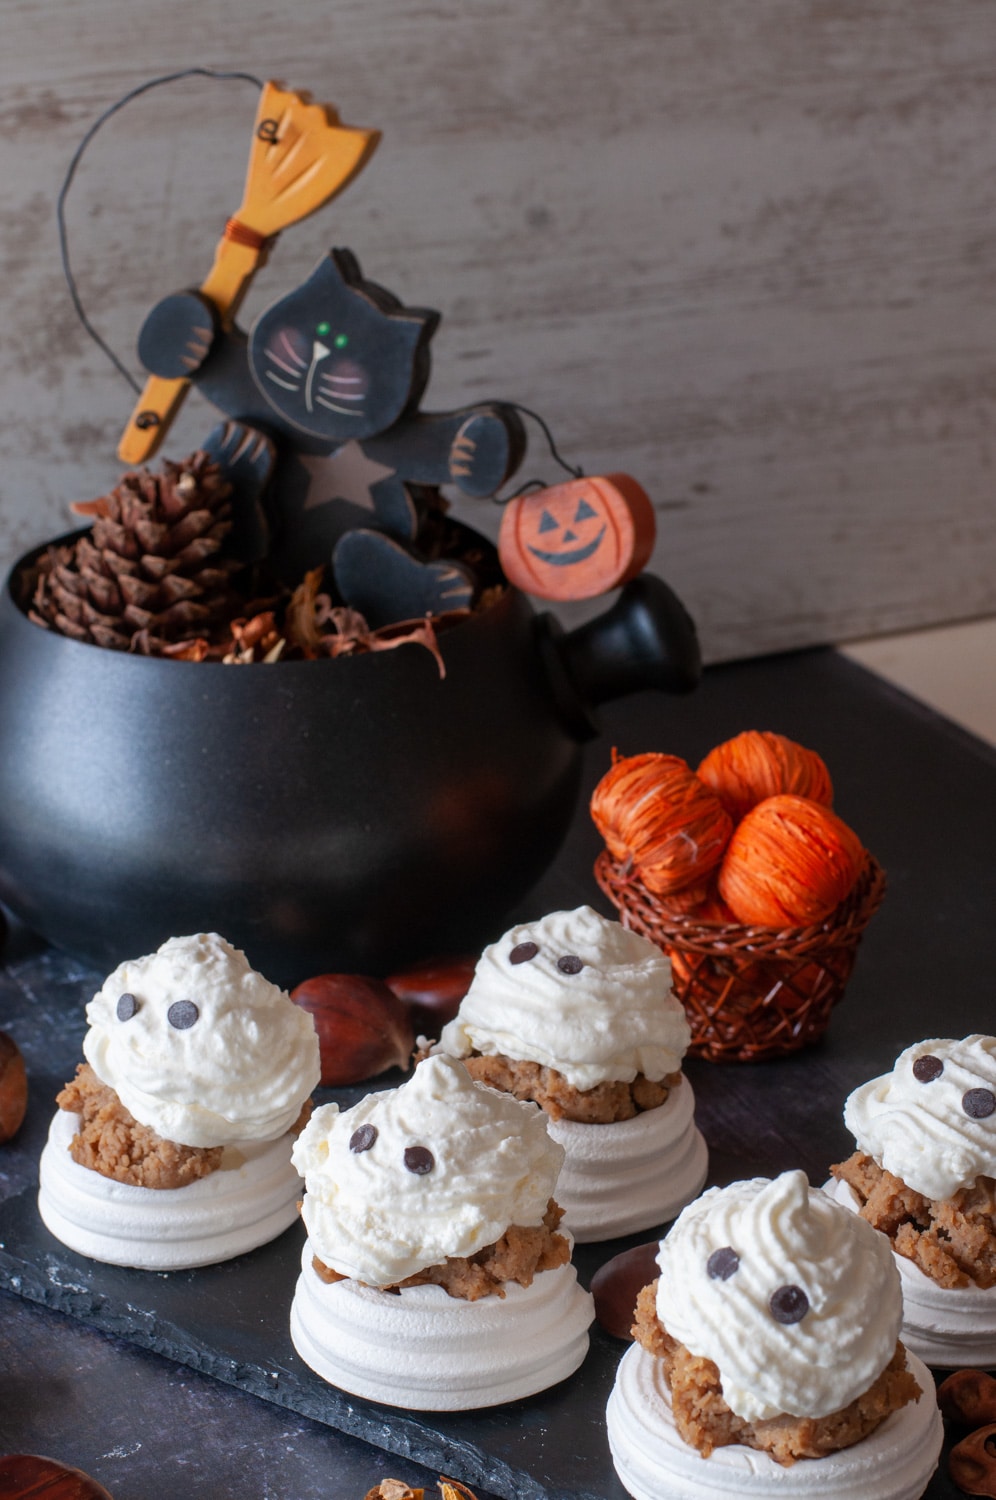 Mont blanc dessert shaped as ghosts